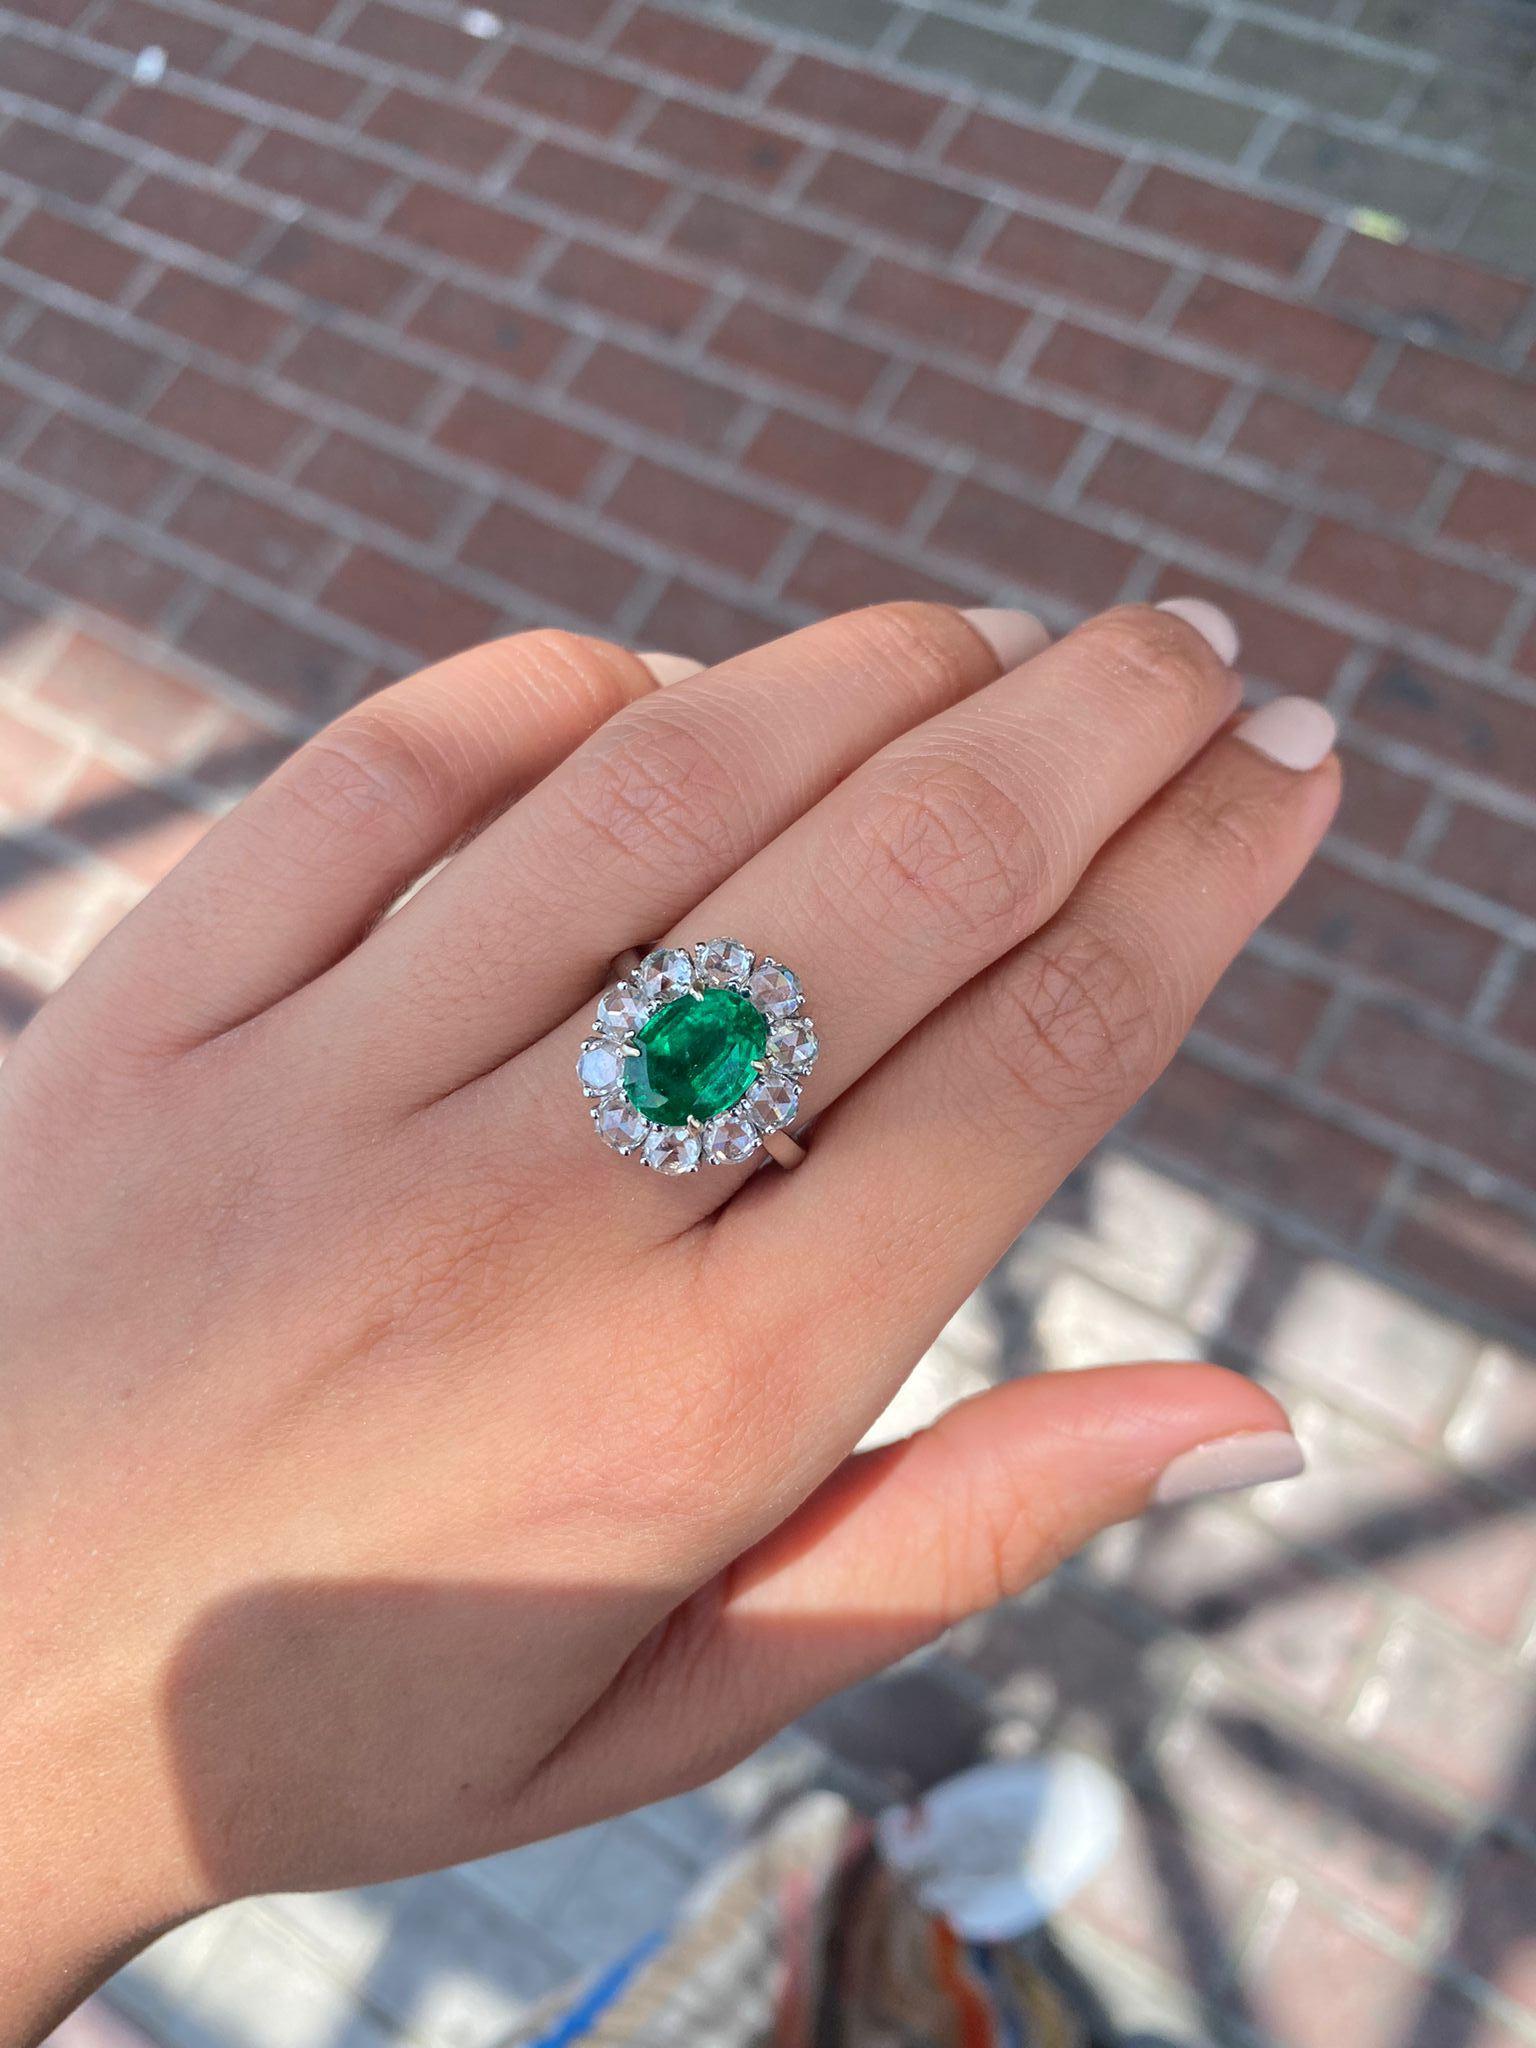 A beautiful 3.12 carat Zambian Emerald surrounded by 1.87 carat VS quality rose-cut White Diamond, all set in 18K White Gold. The quality of Zambian Emerald is of top quality, vivid green color with very few inclusions and has great luster and